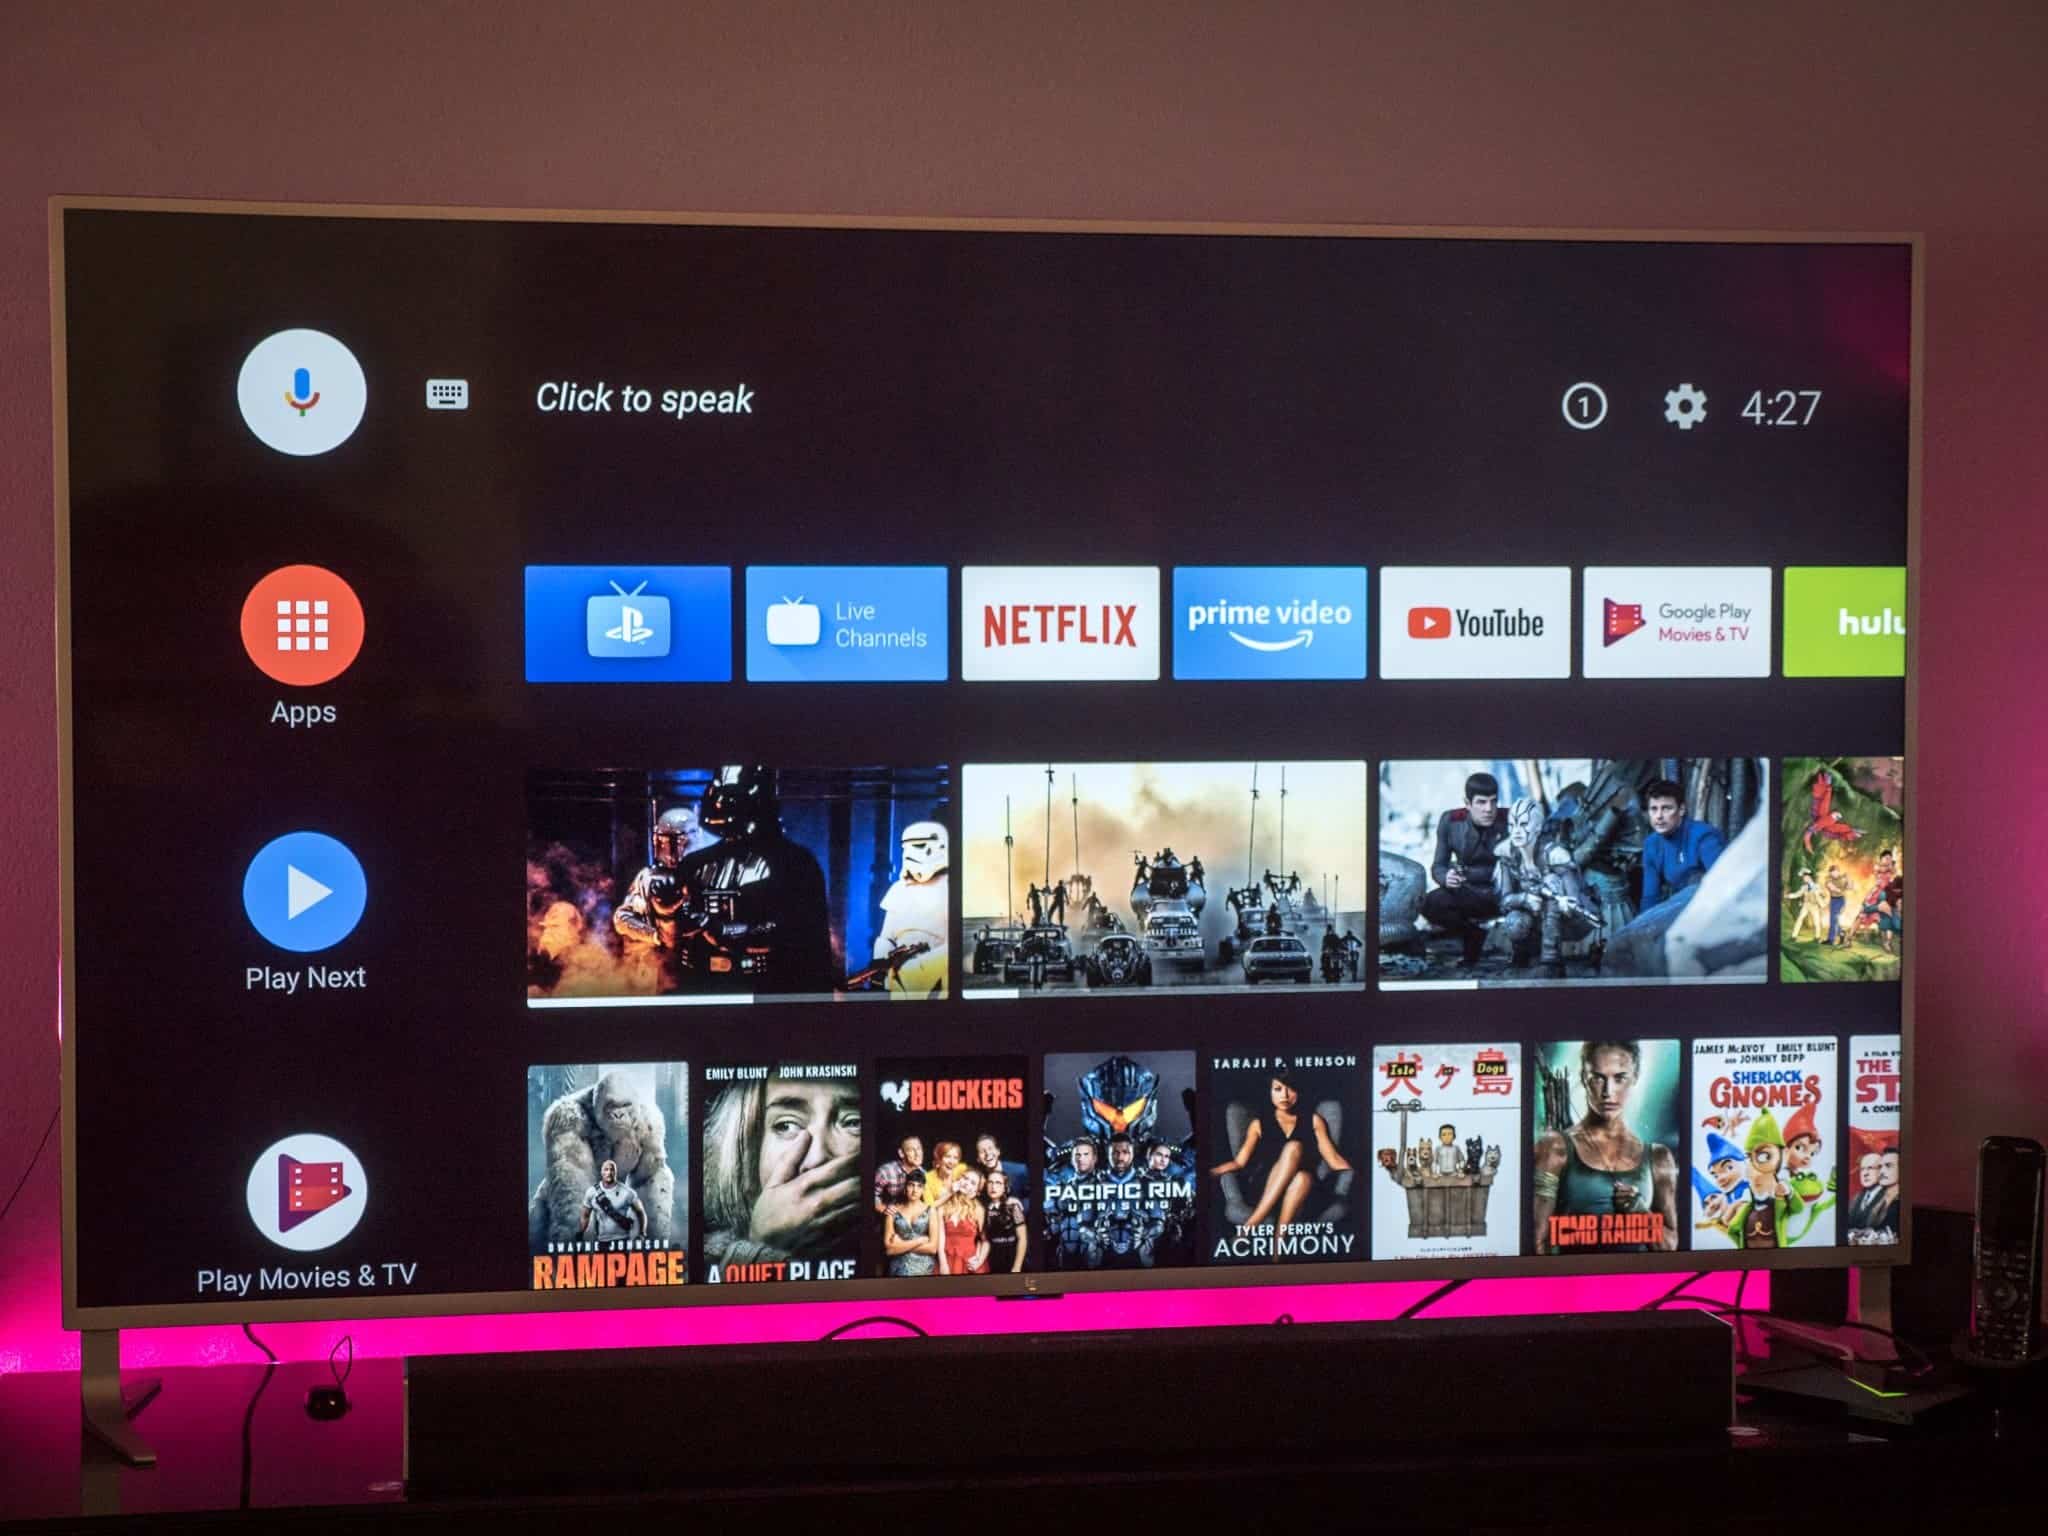 The Future of TV: Exploring the 7 Best Android TV Options 